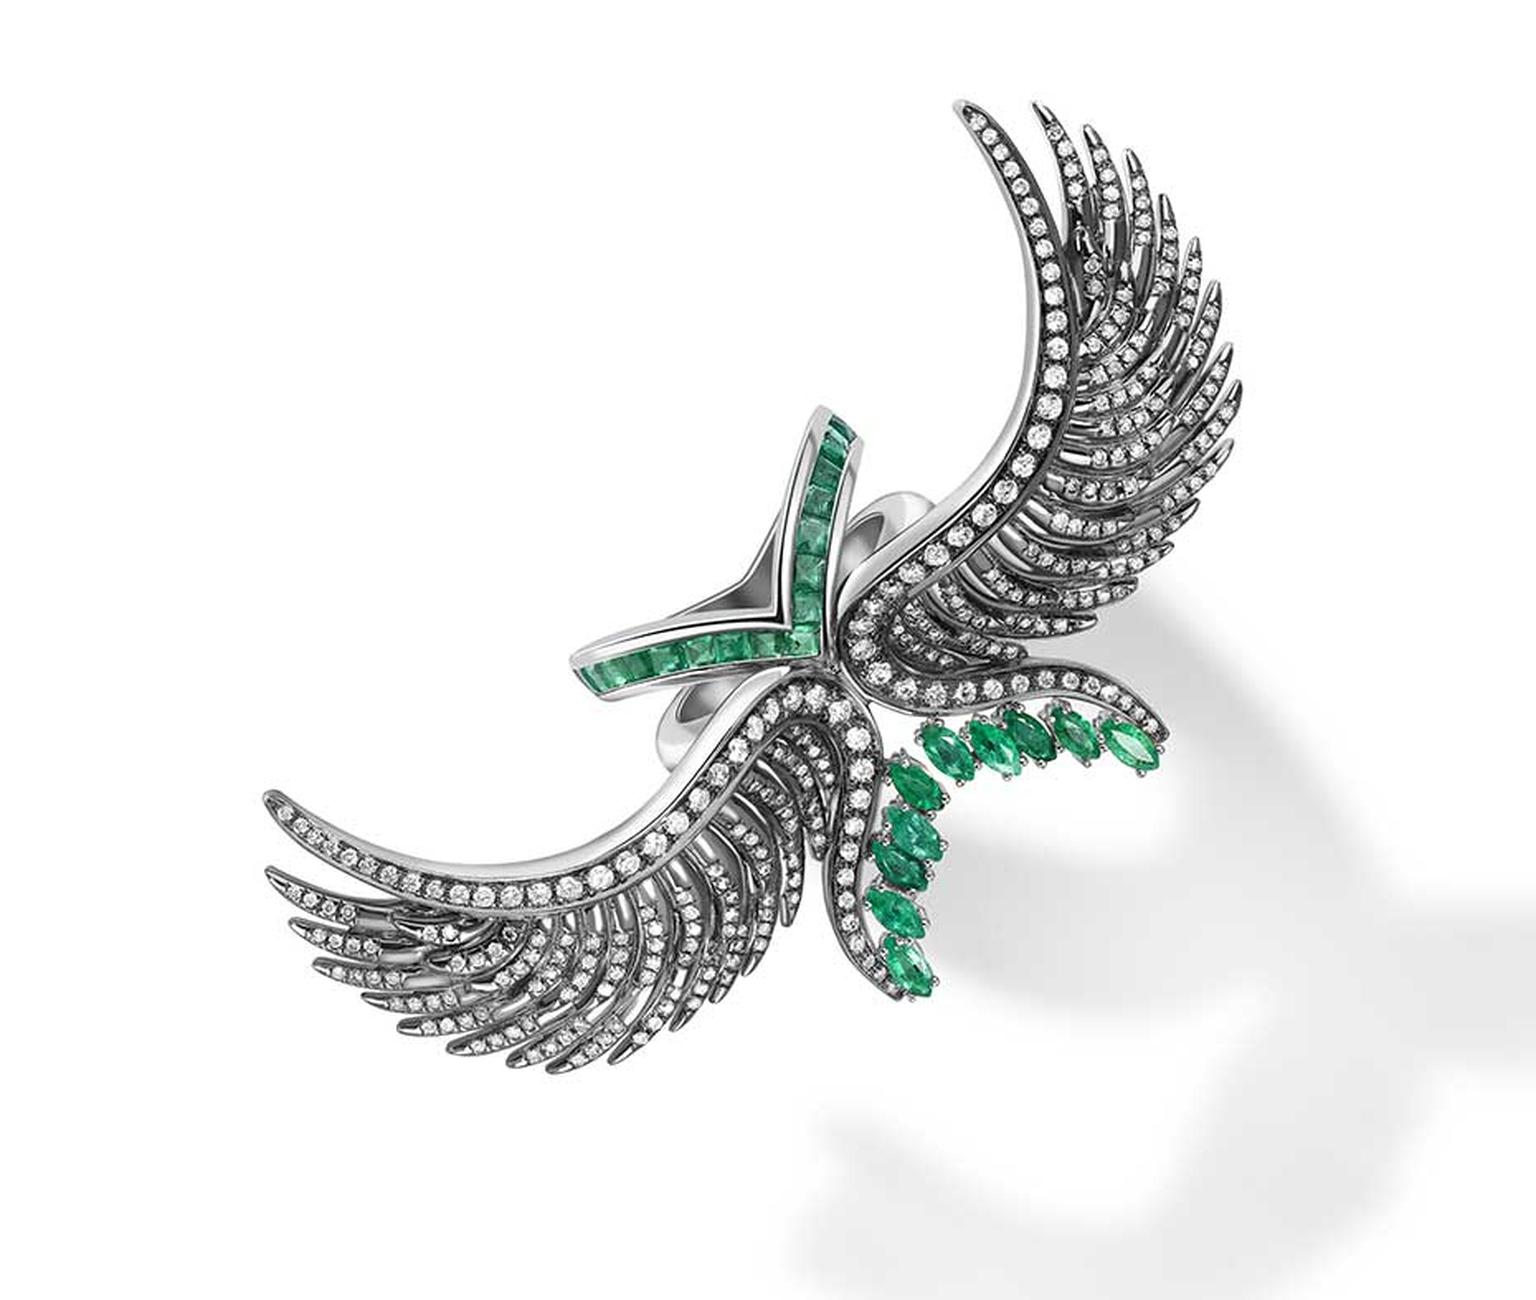 Leyla Abdollahi Lust & Lure collection ring in white gold with emeralds, diamonds and onyx